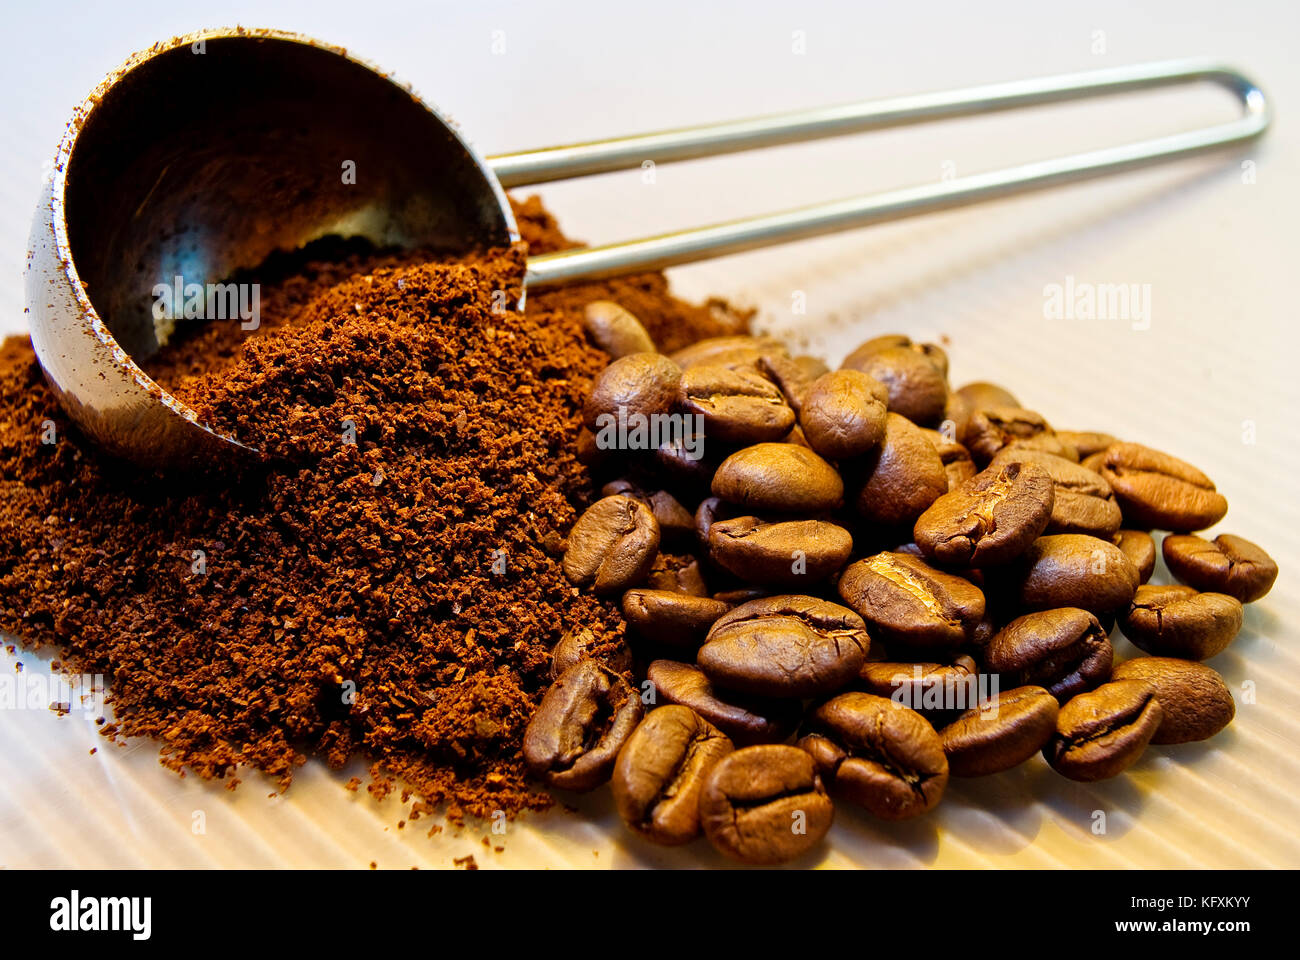 Coffee, beans and ground. Stock Photo